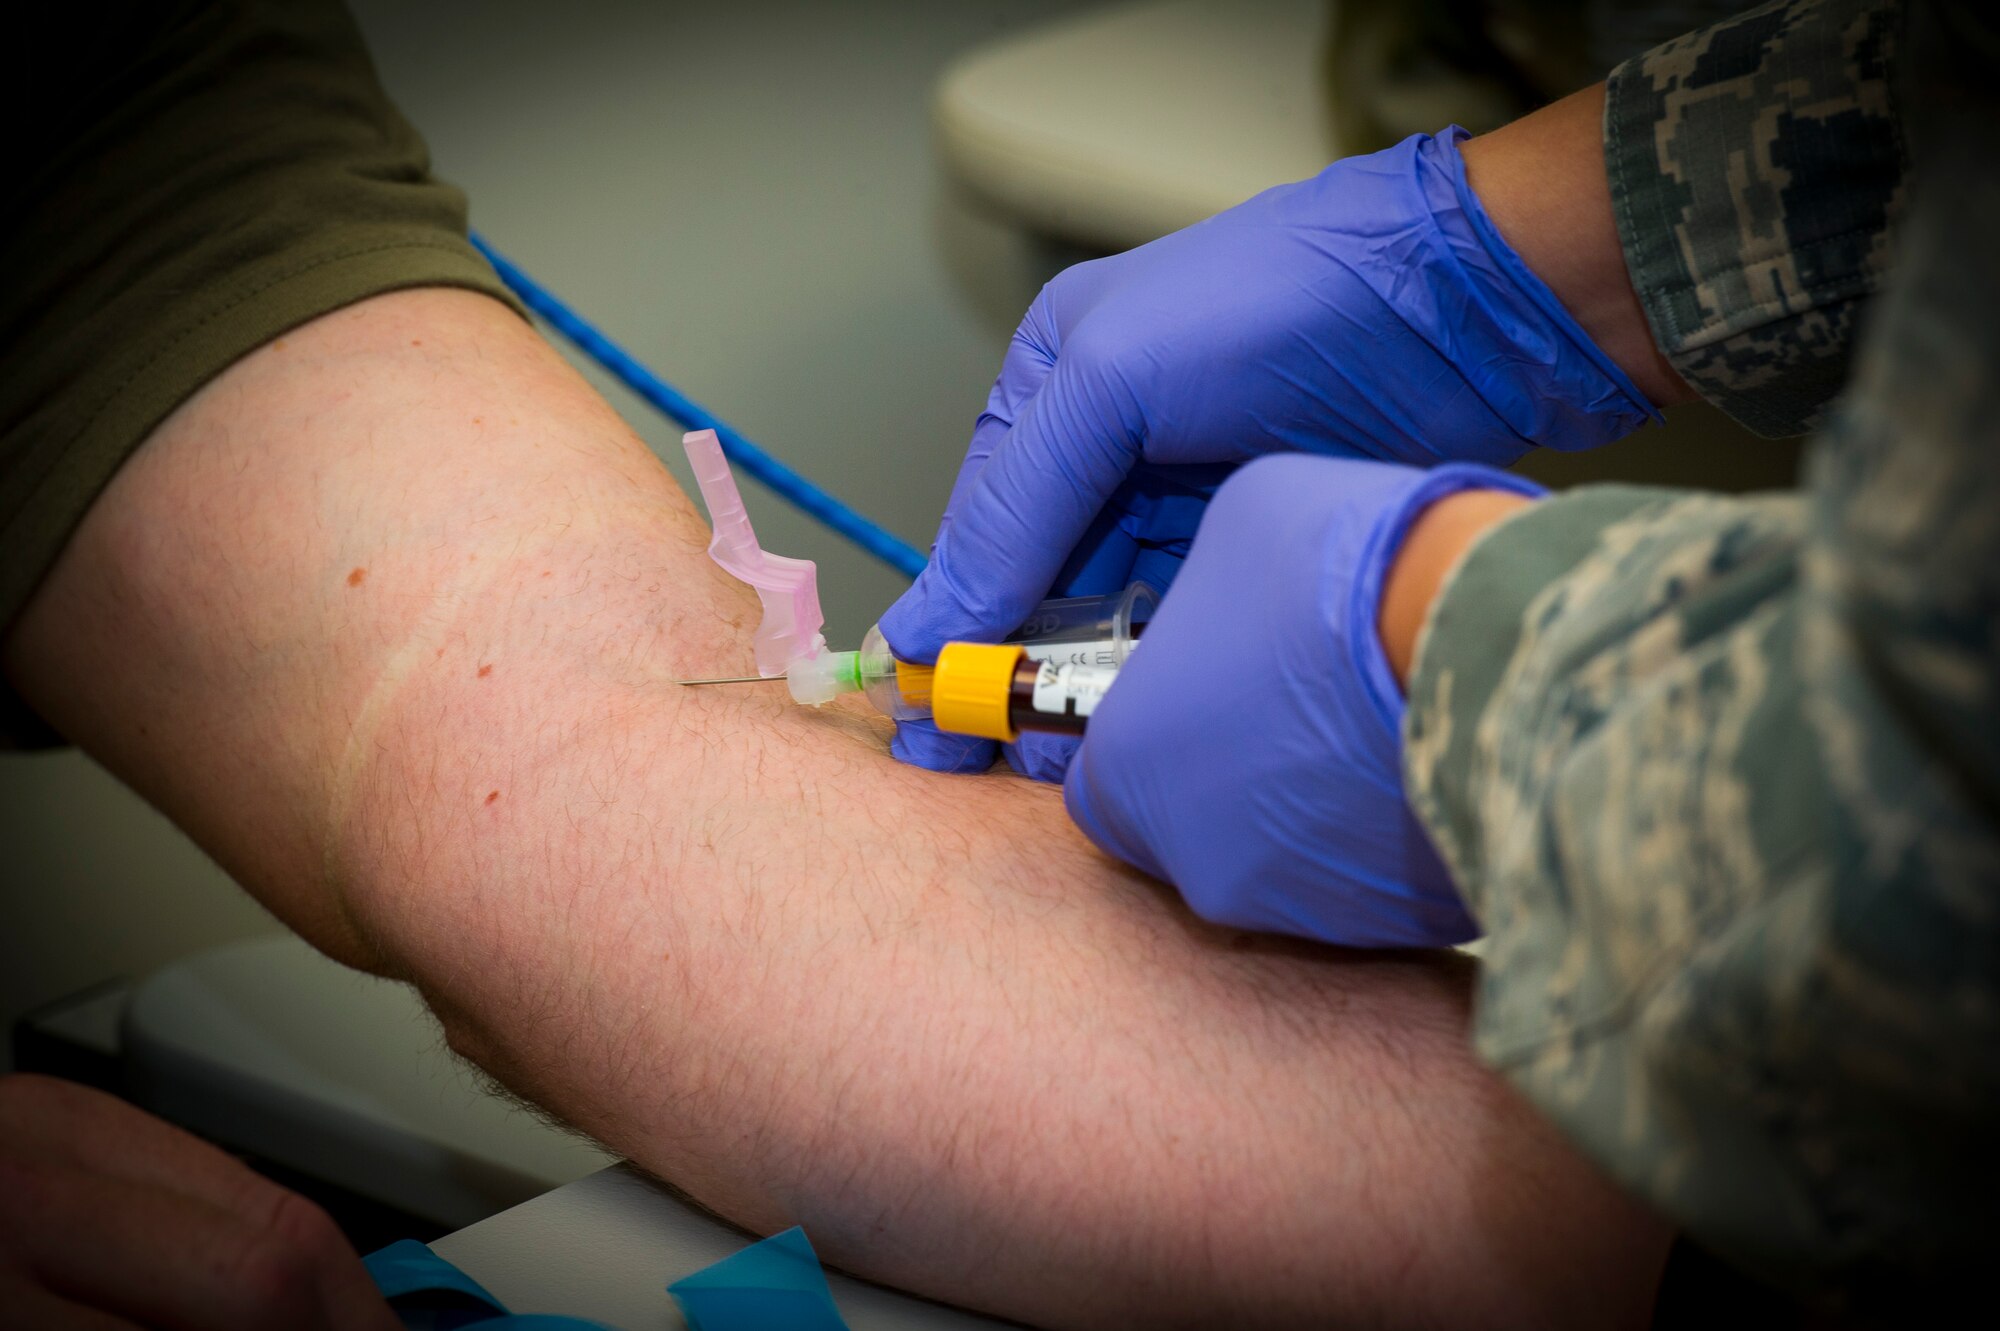 U.S. Air Force Tech Sgt. Leslie Robinson, 926th Aerospace Medicine Squadron medical lab technician, draws blood from a patient inside the medical clinic, July 13, 2019 at Nellis Air Force Base, Nev.